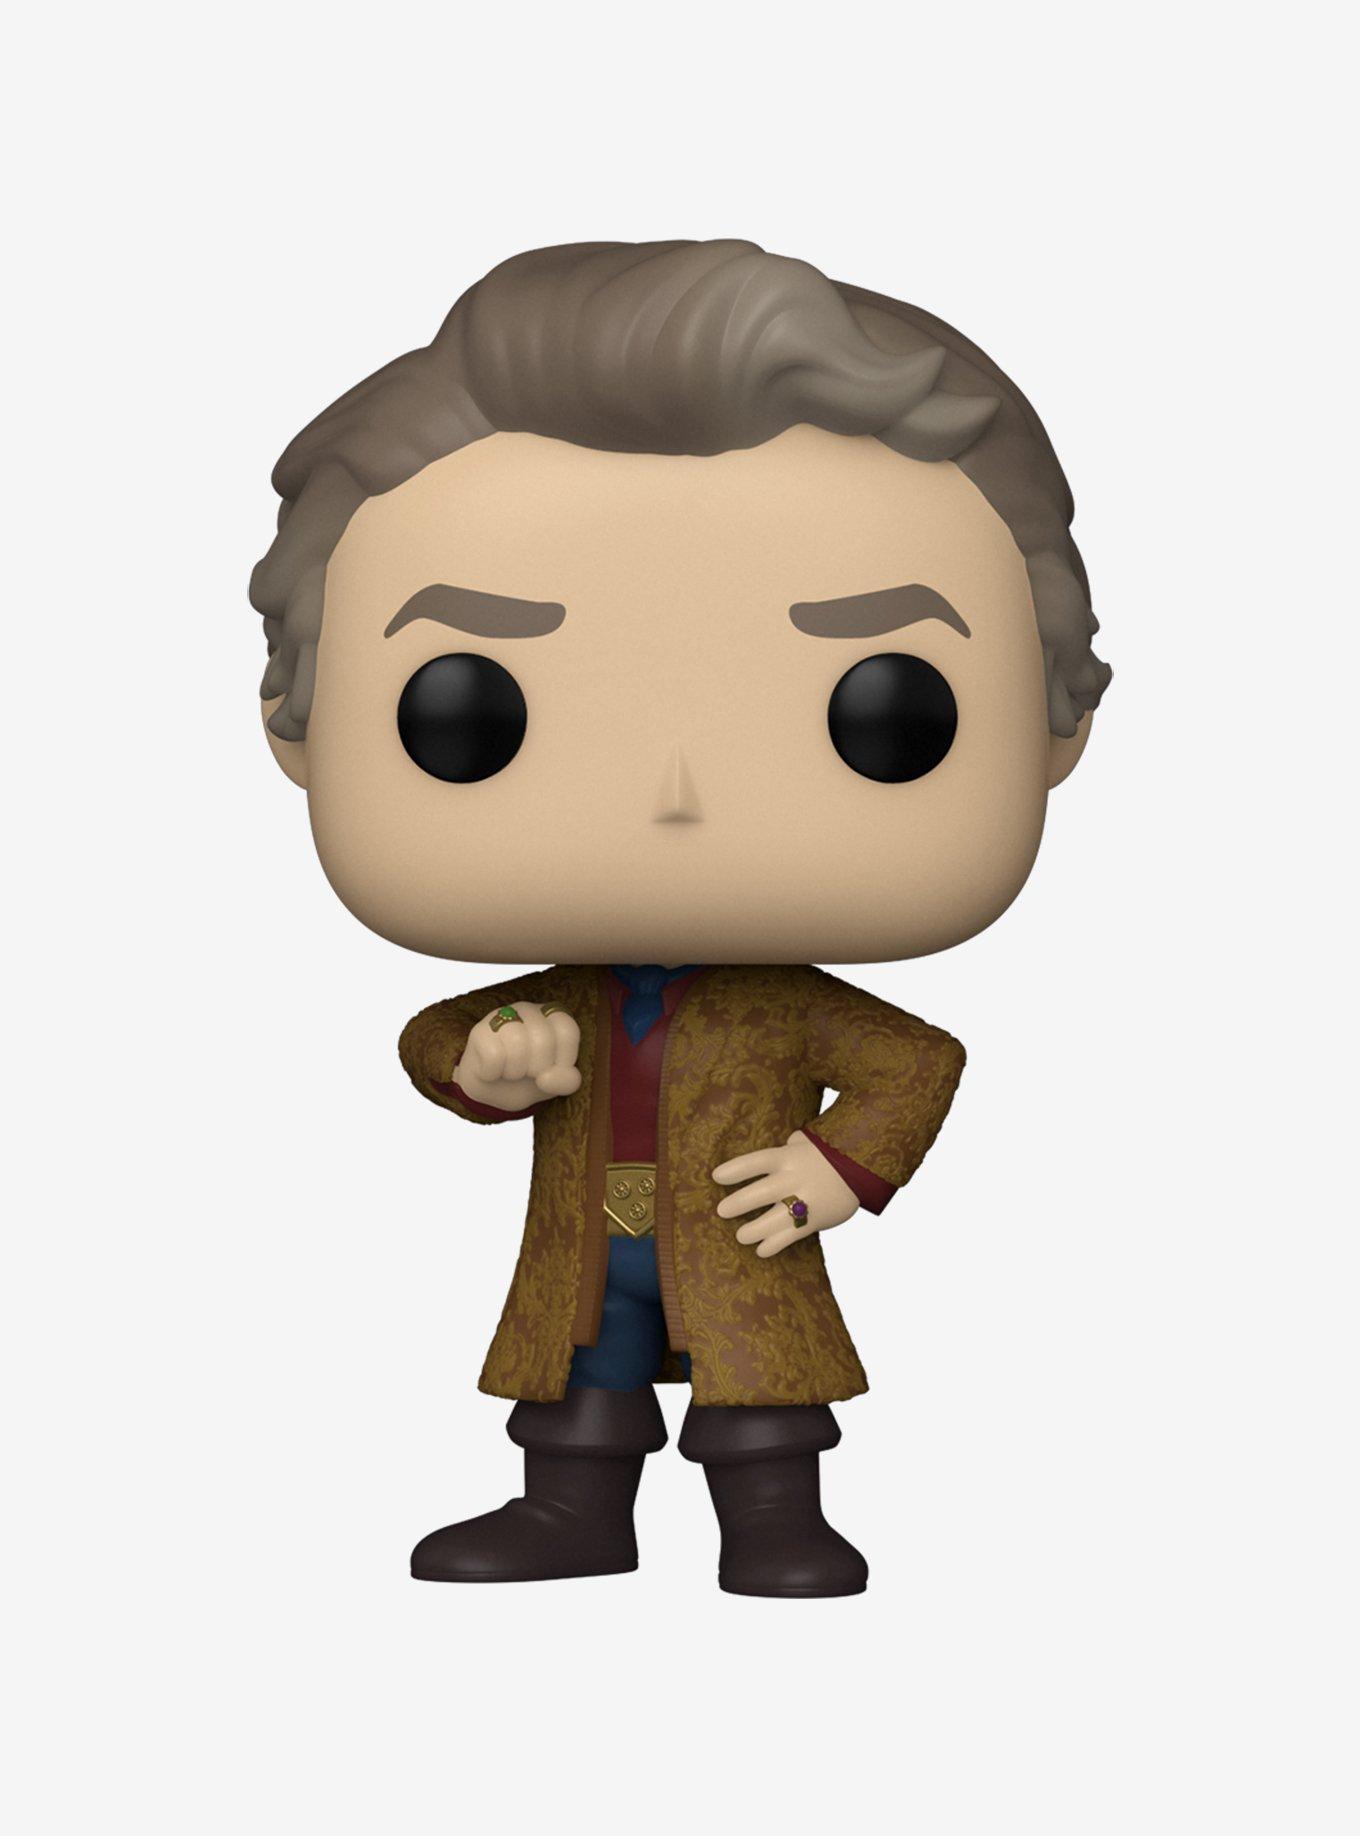 Check out These Luca Funko Pops - The Good Men Project